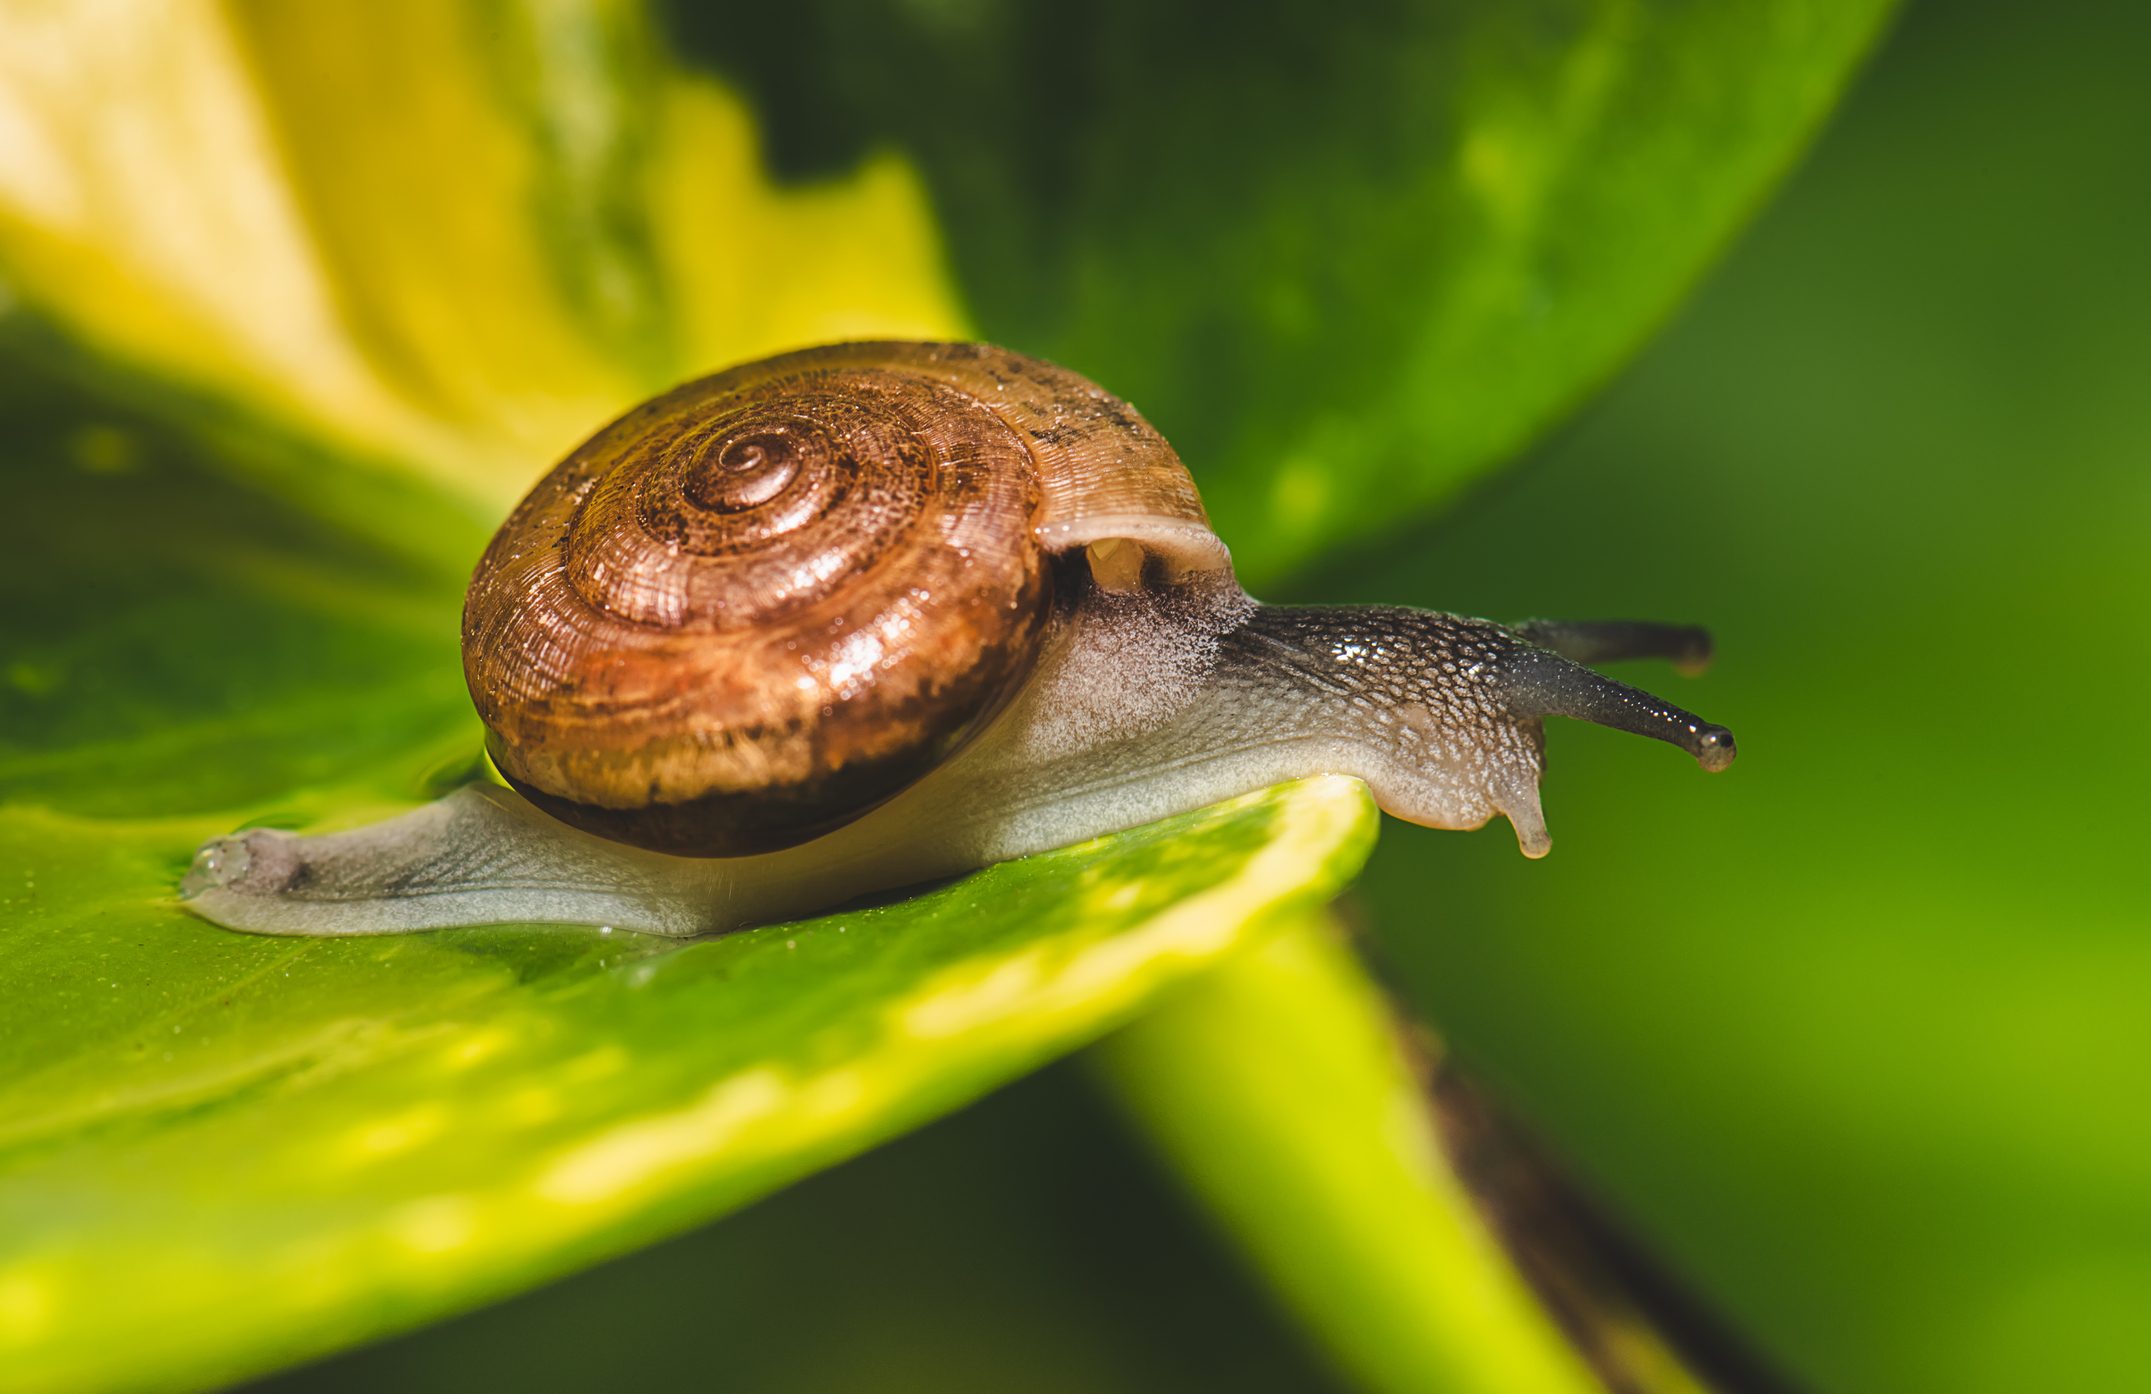 Small brown snail on green leaf.